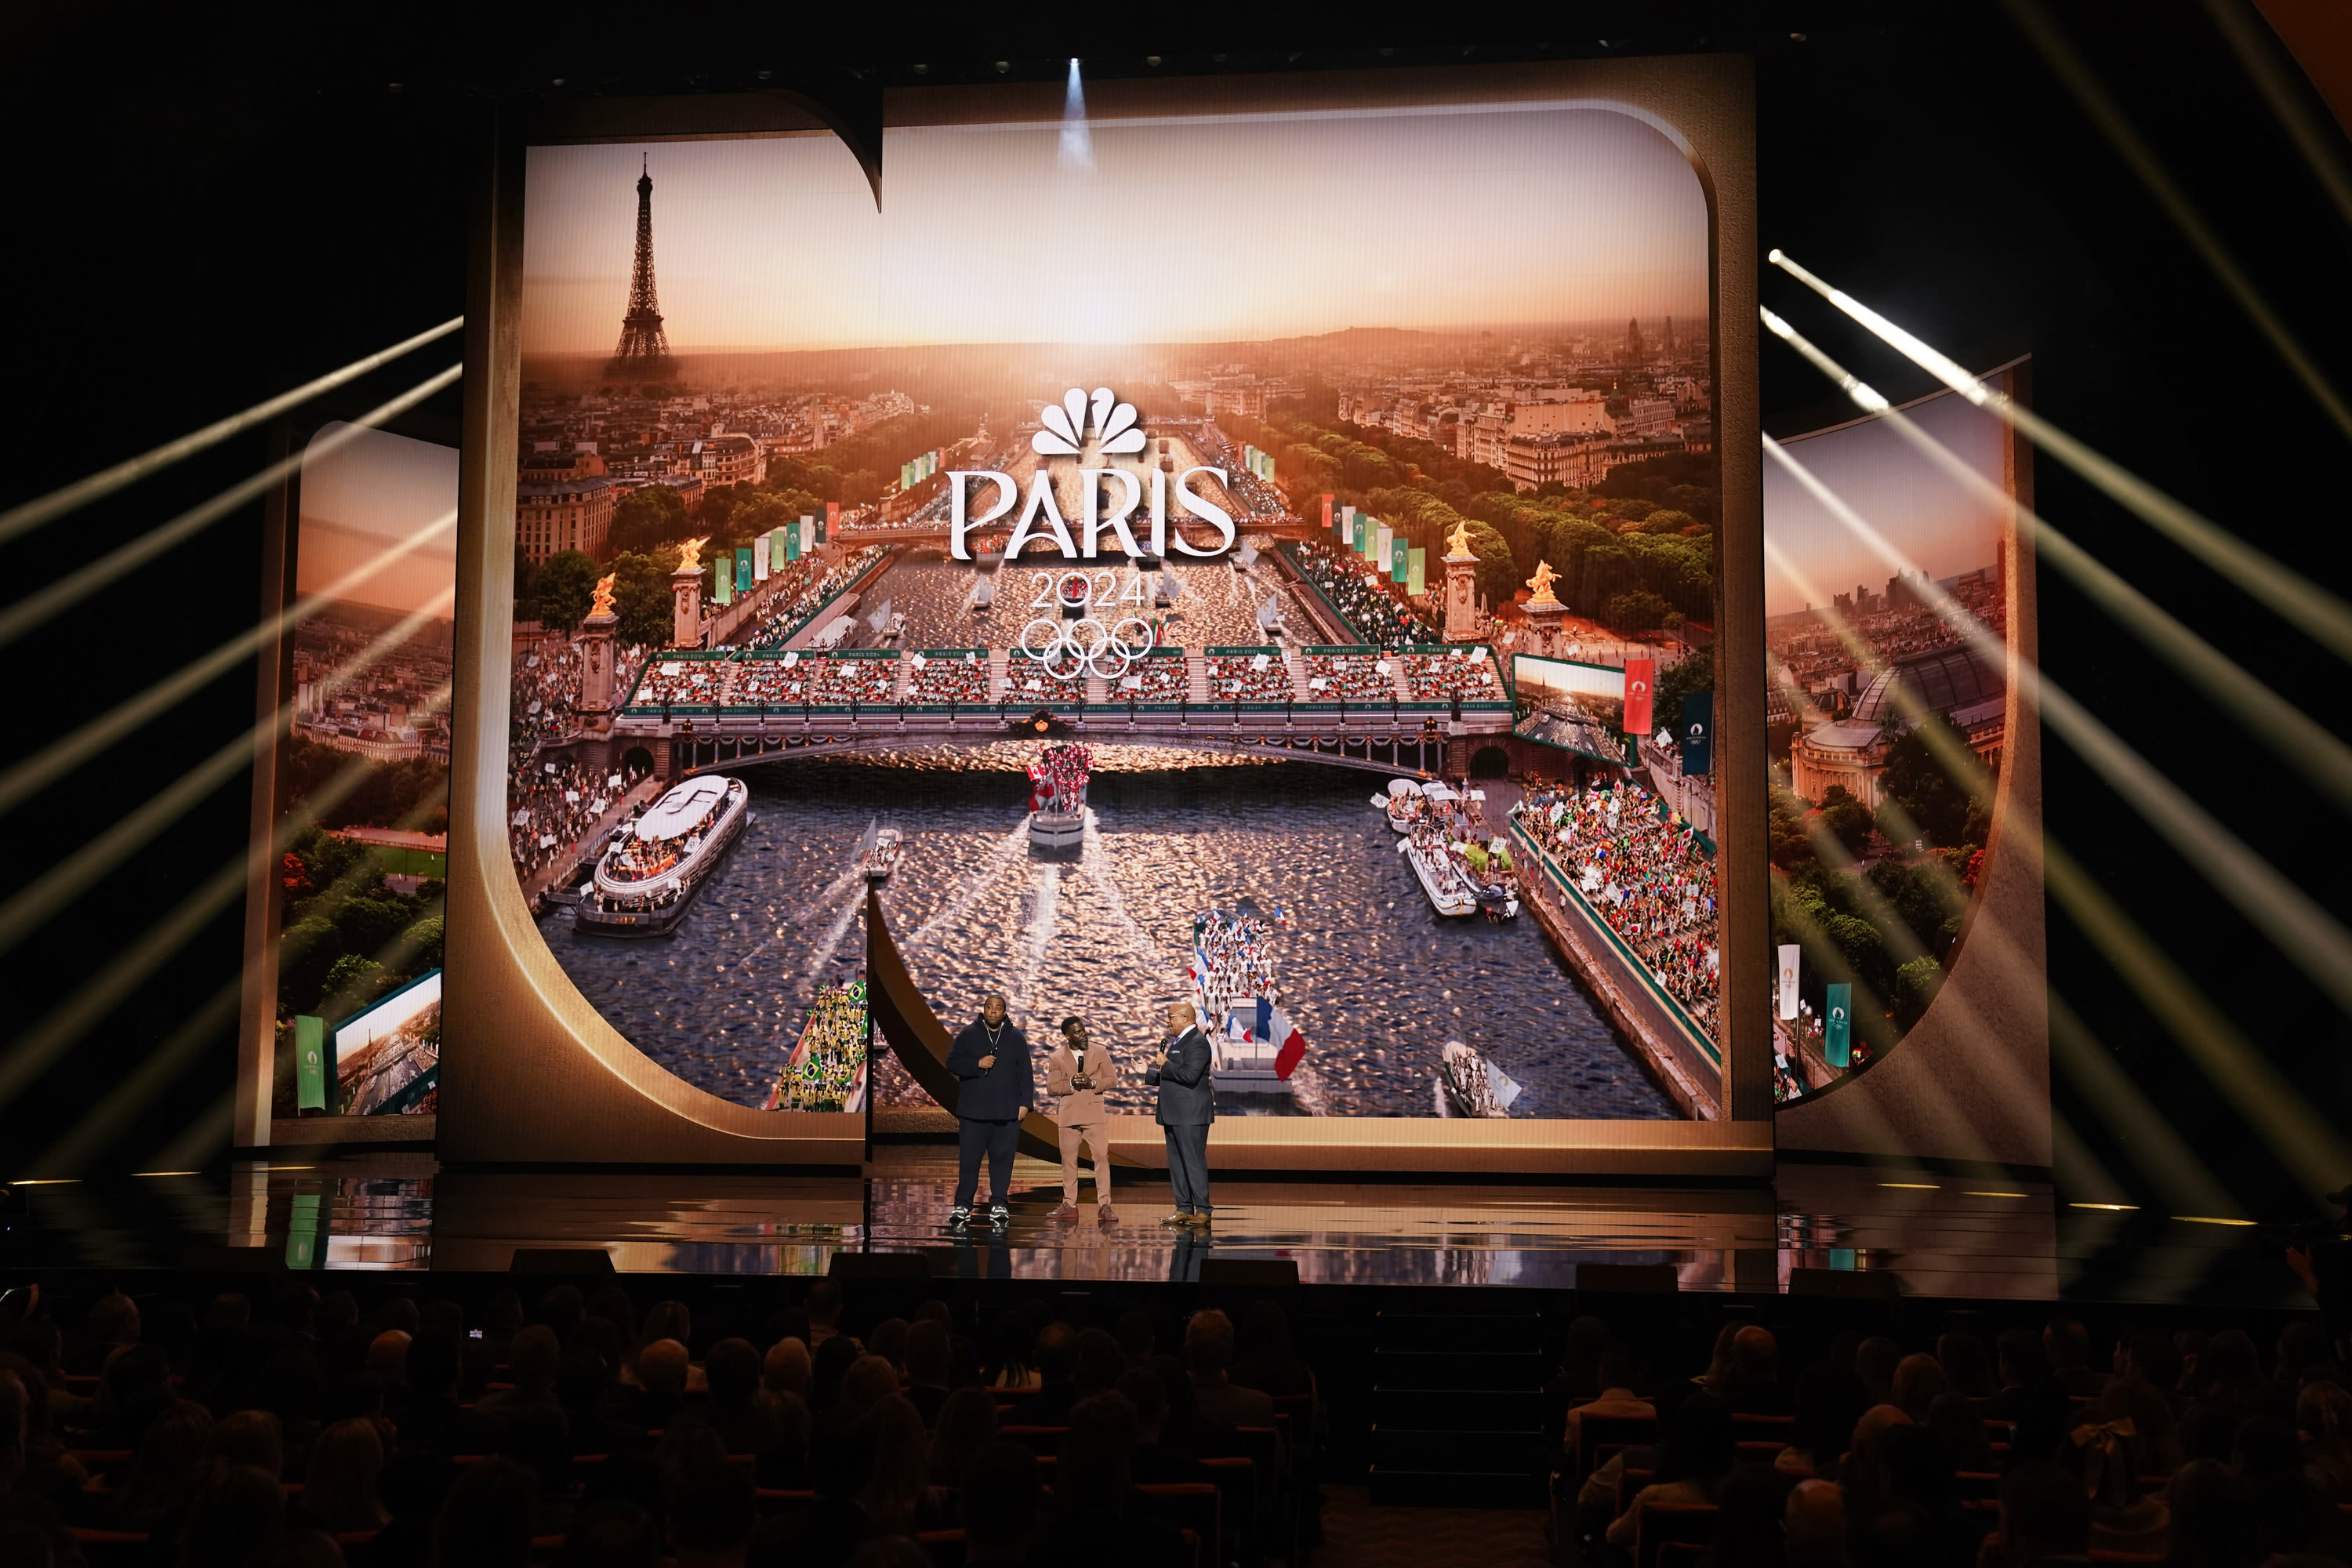 NBCUniversal To Air 24/7 Paris Olympics Coverage In 4K HDR On USA Network